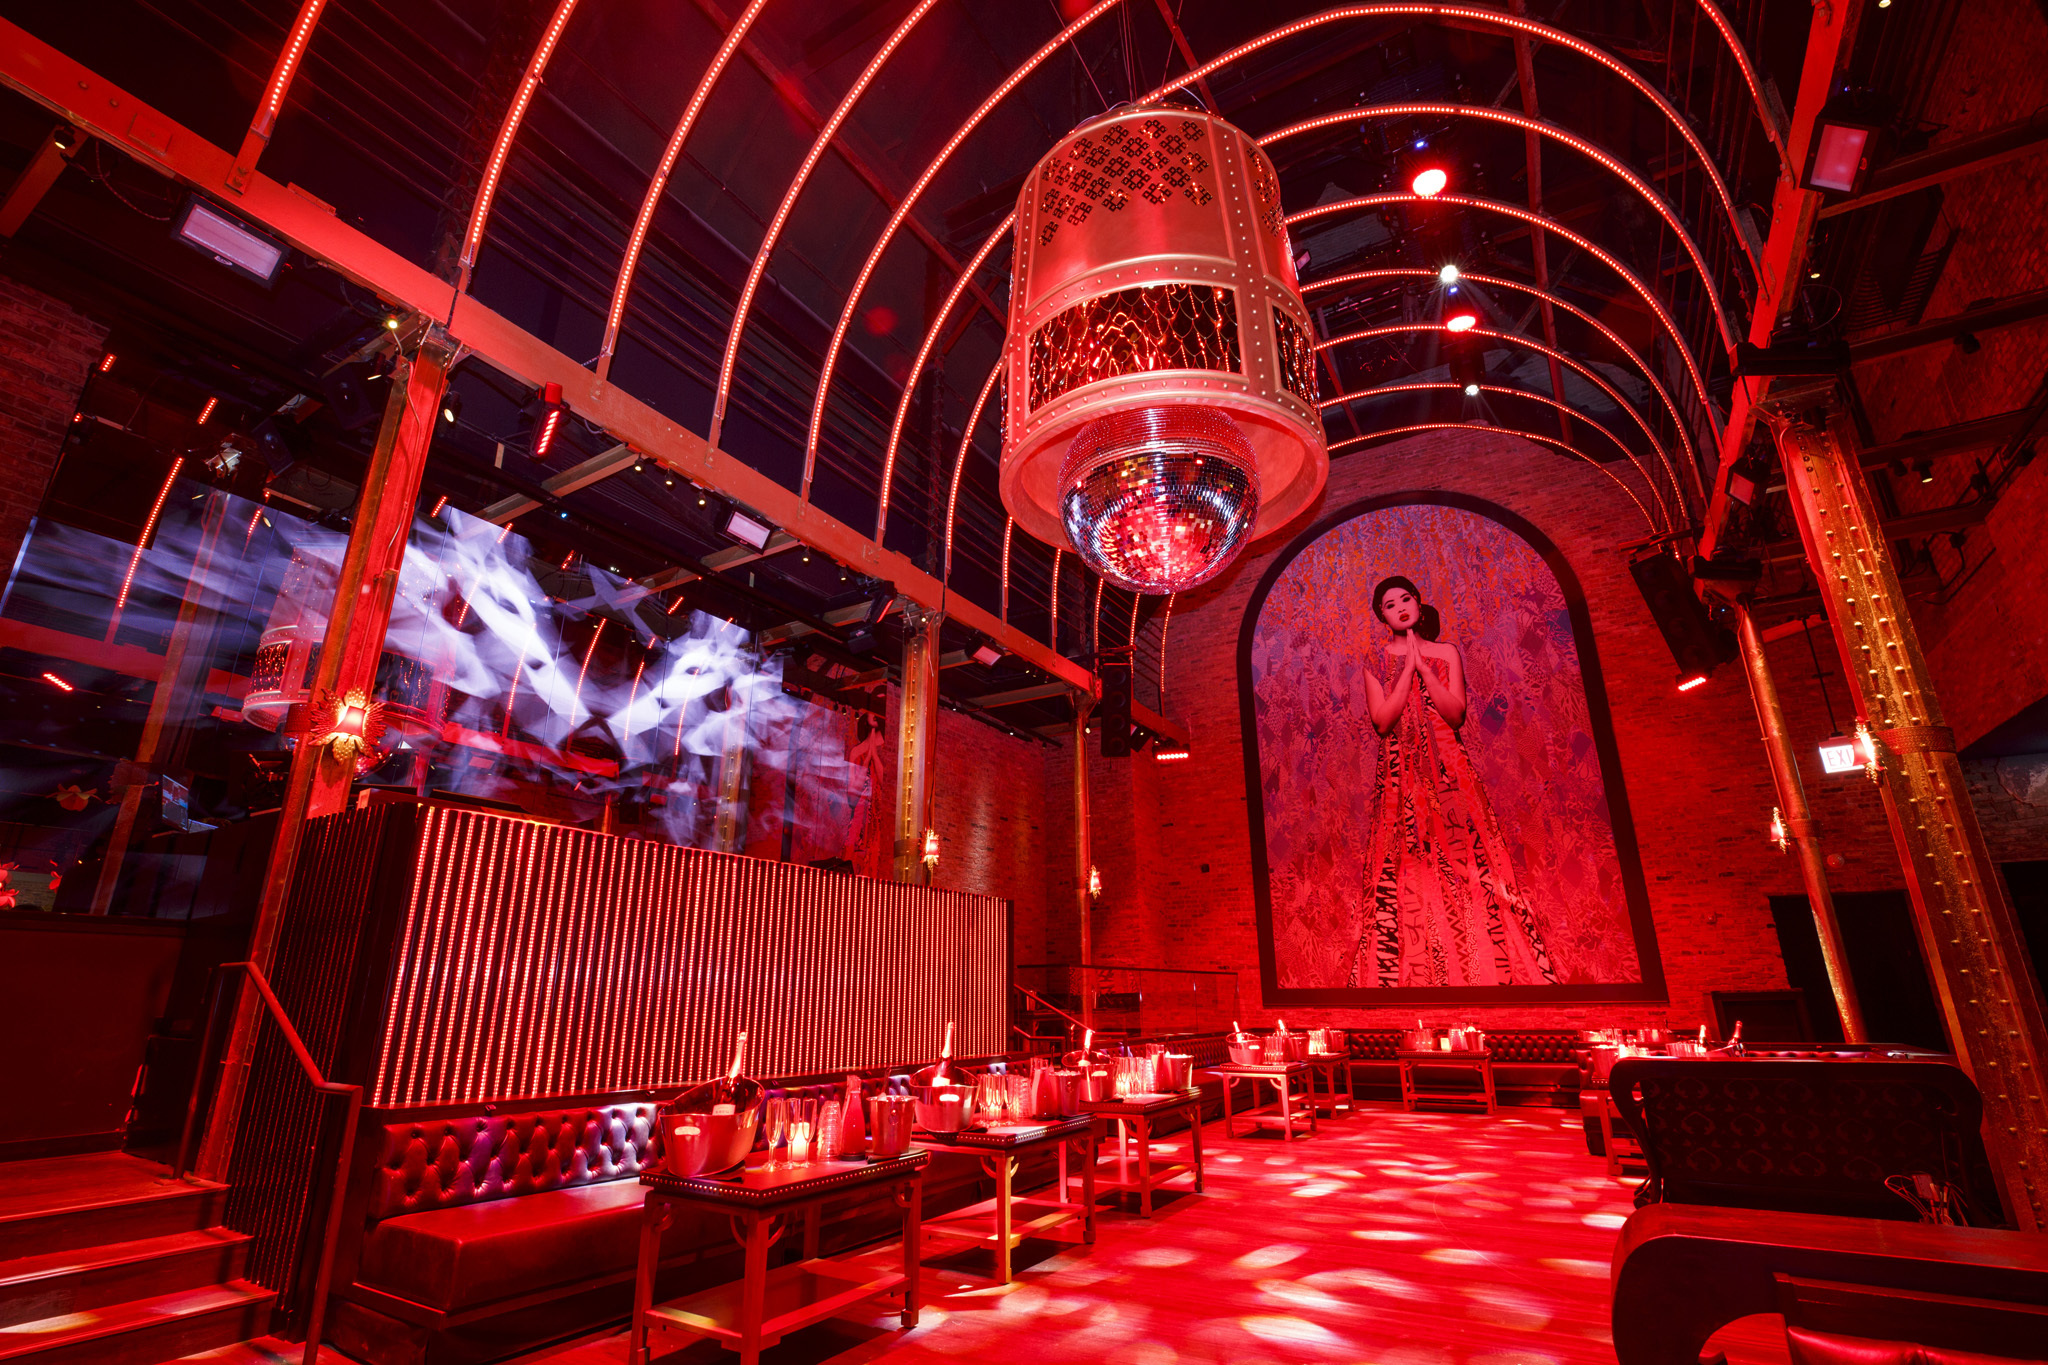 Take a look inside Tao Chicago's ornate River North nightclub